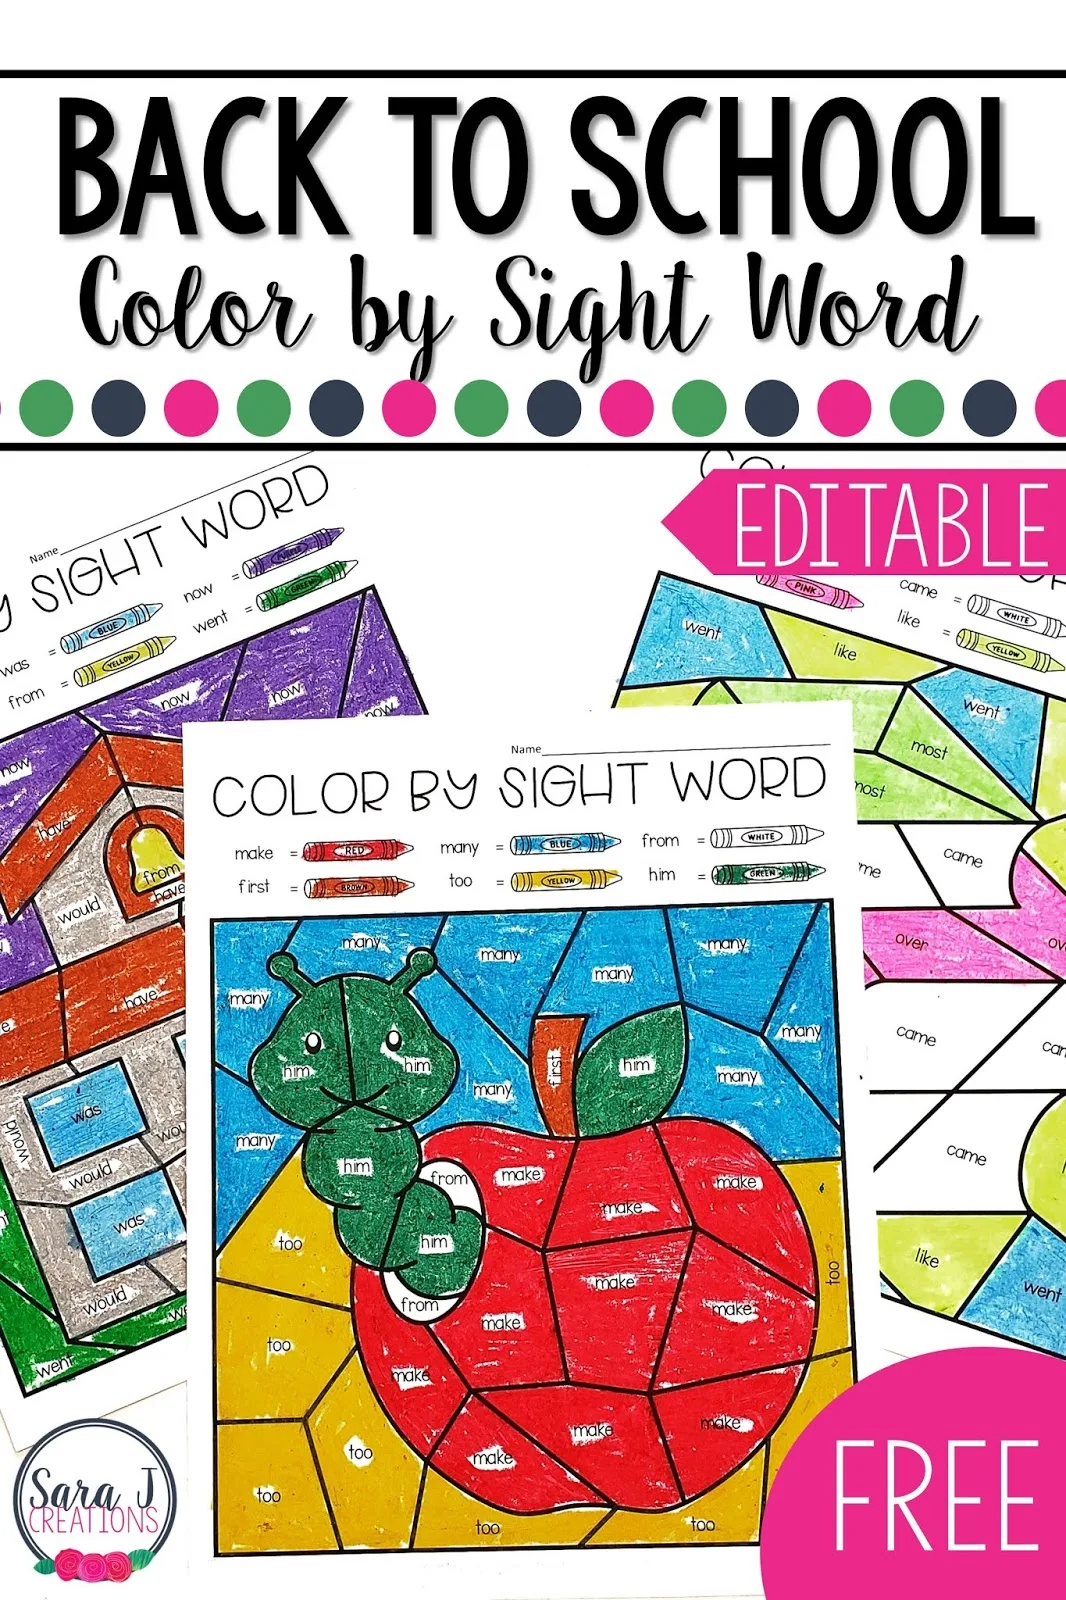 Editable Back to School color by sight word FREEBIE!!!! This is exactly what you need to make practicing sight words fun and meaningful for your students. You can easily differentiate for each student with a few quick clicks. No matter what sight words your students are working on, you can create personalized coloring worksheets in a snap!